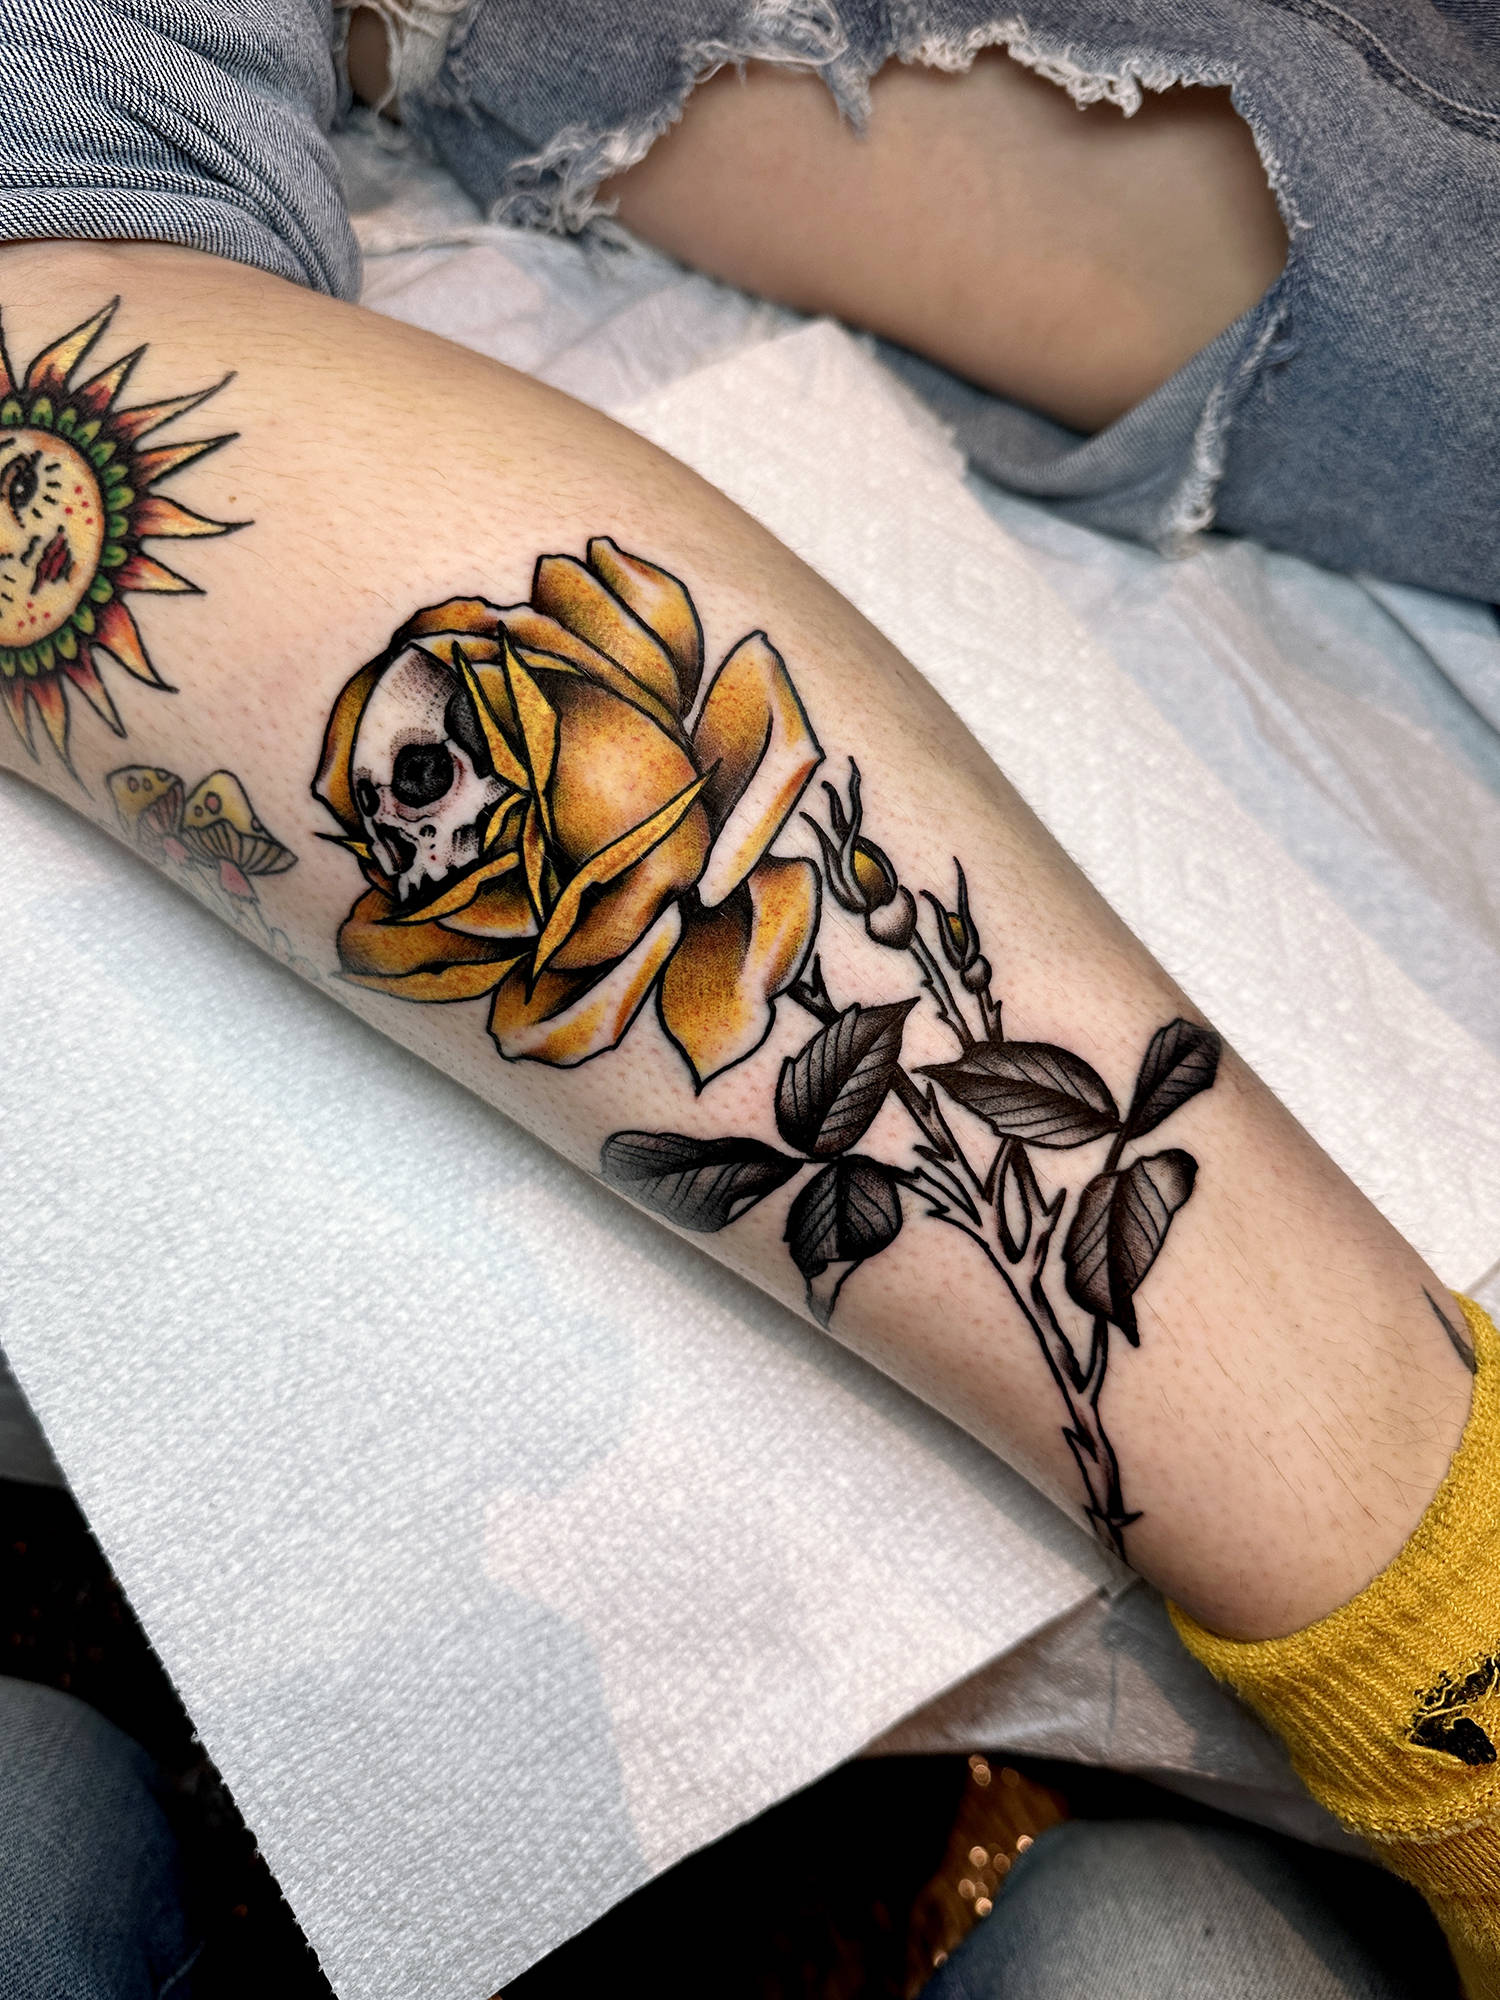 A skull rose can symbolize the balance of life, and yes, Mark Clifford does color tattoos